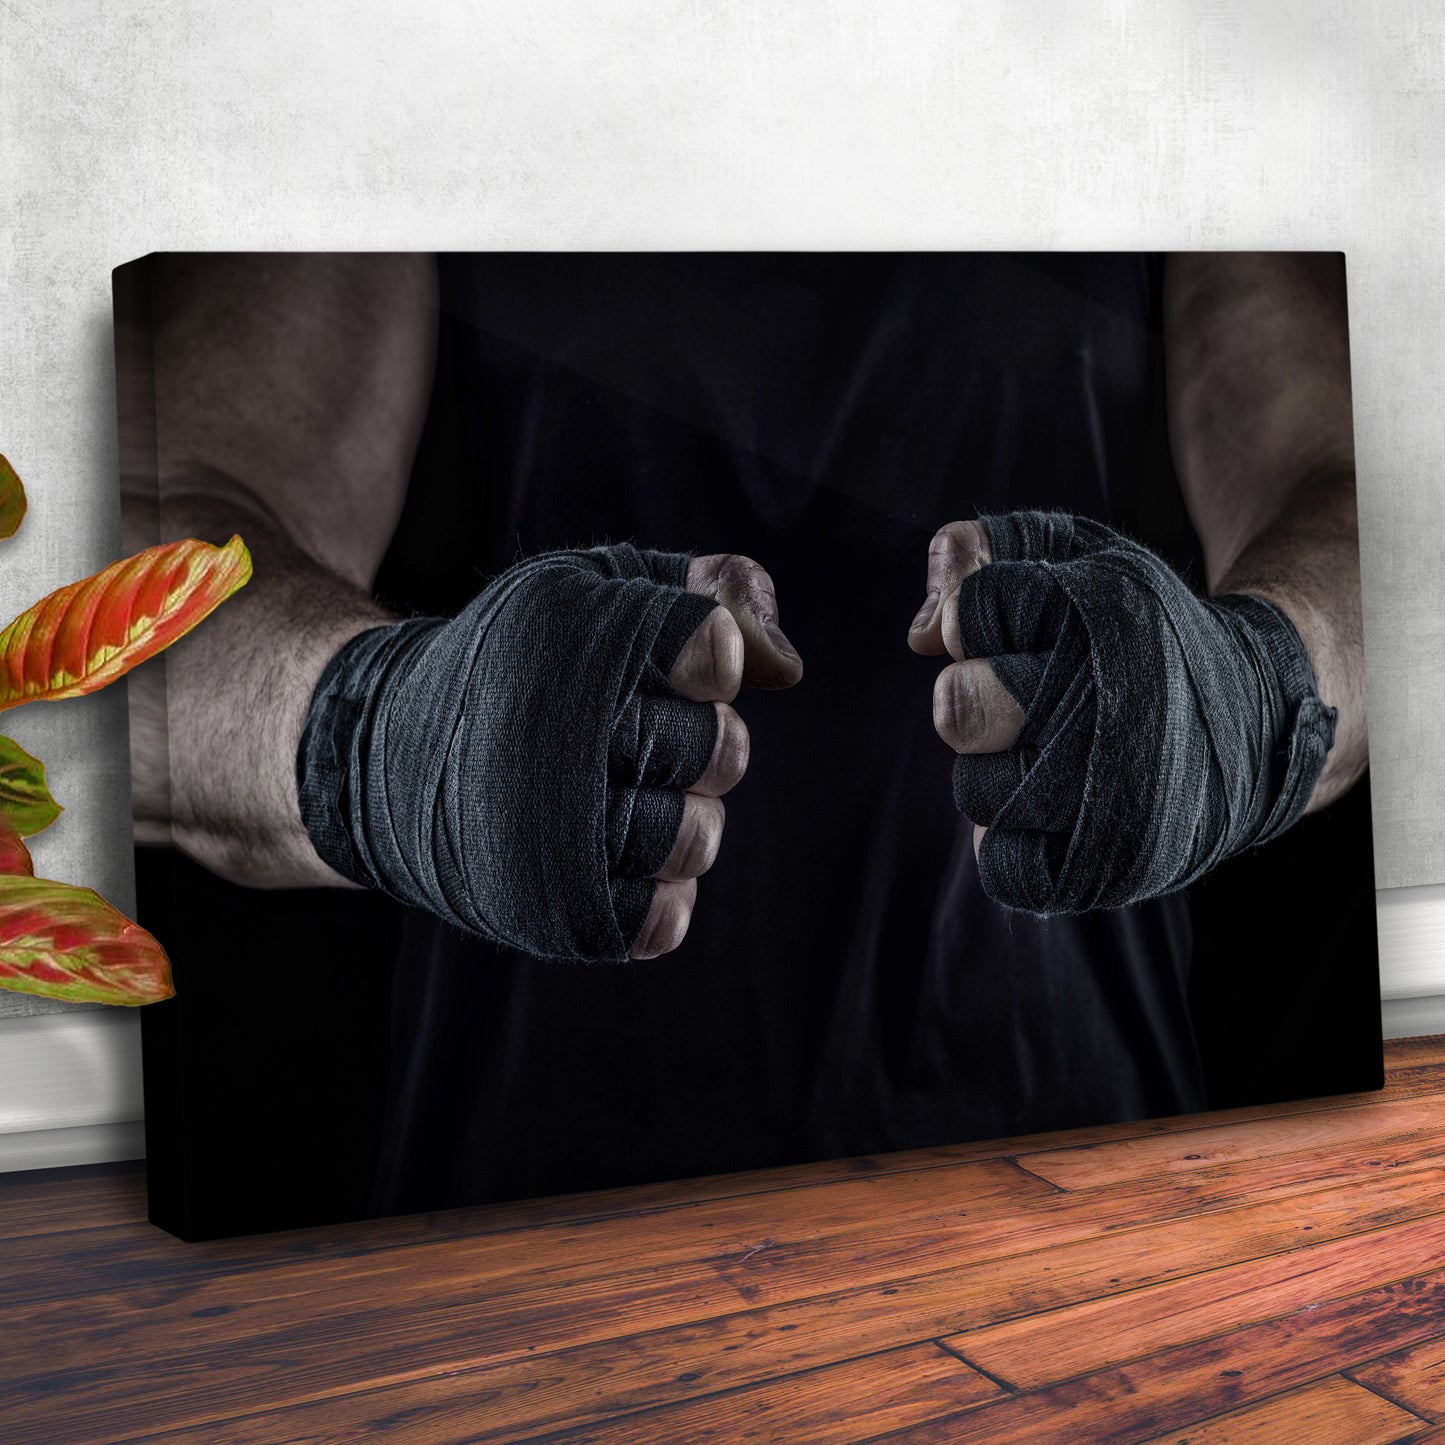 Kickboxing Wrapped Hand Canvas Wall Art Style 2 - Image by Tailored Canvases